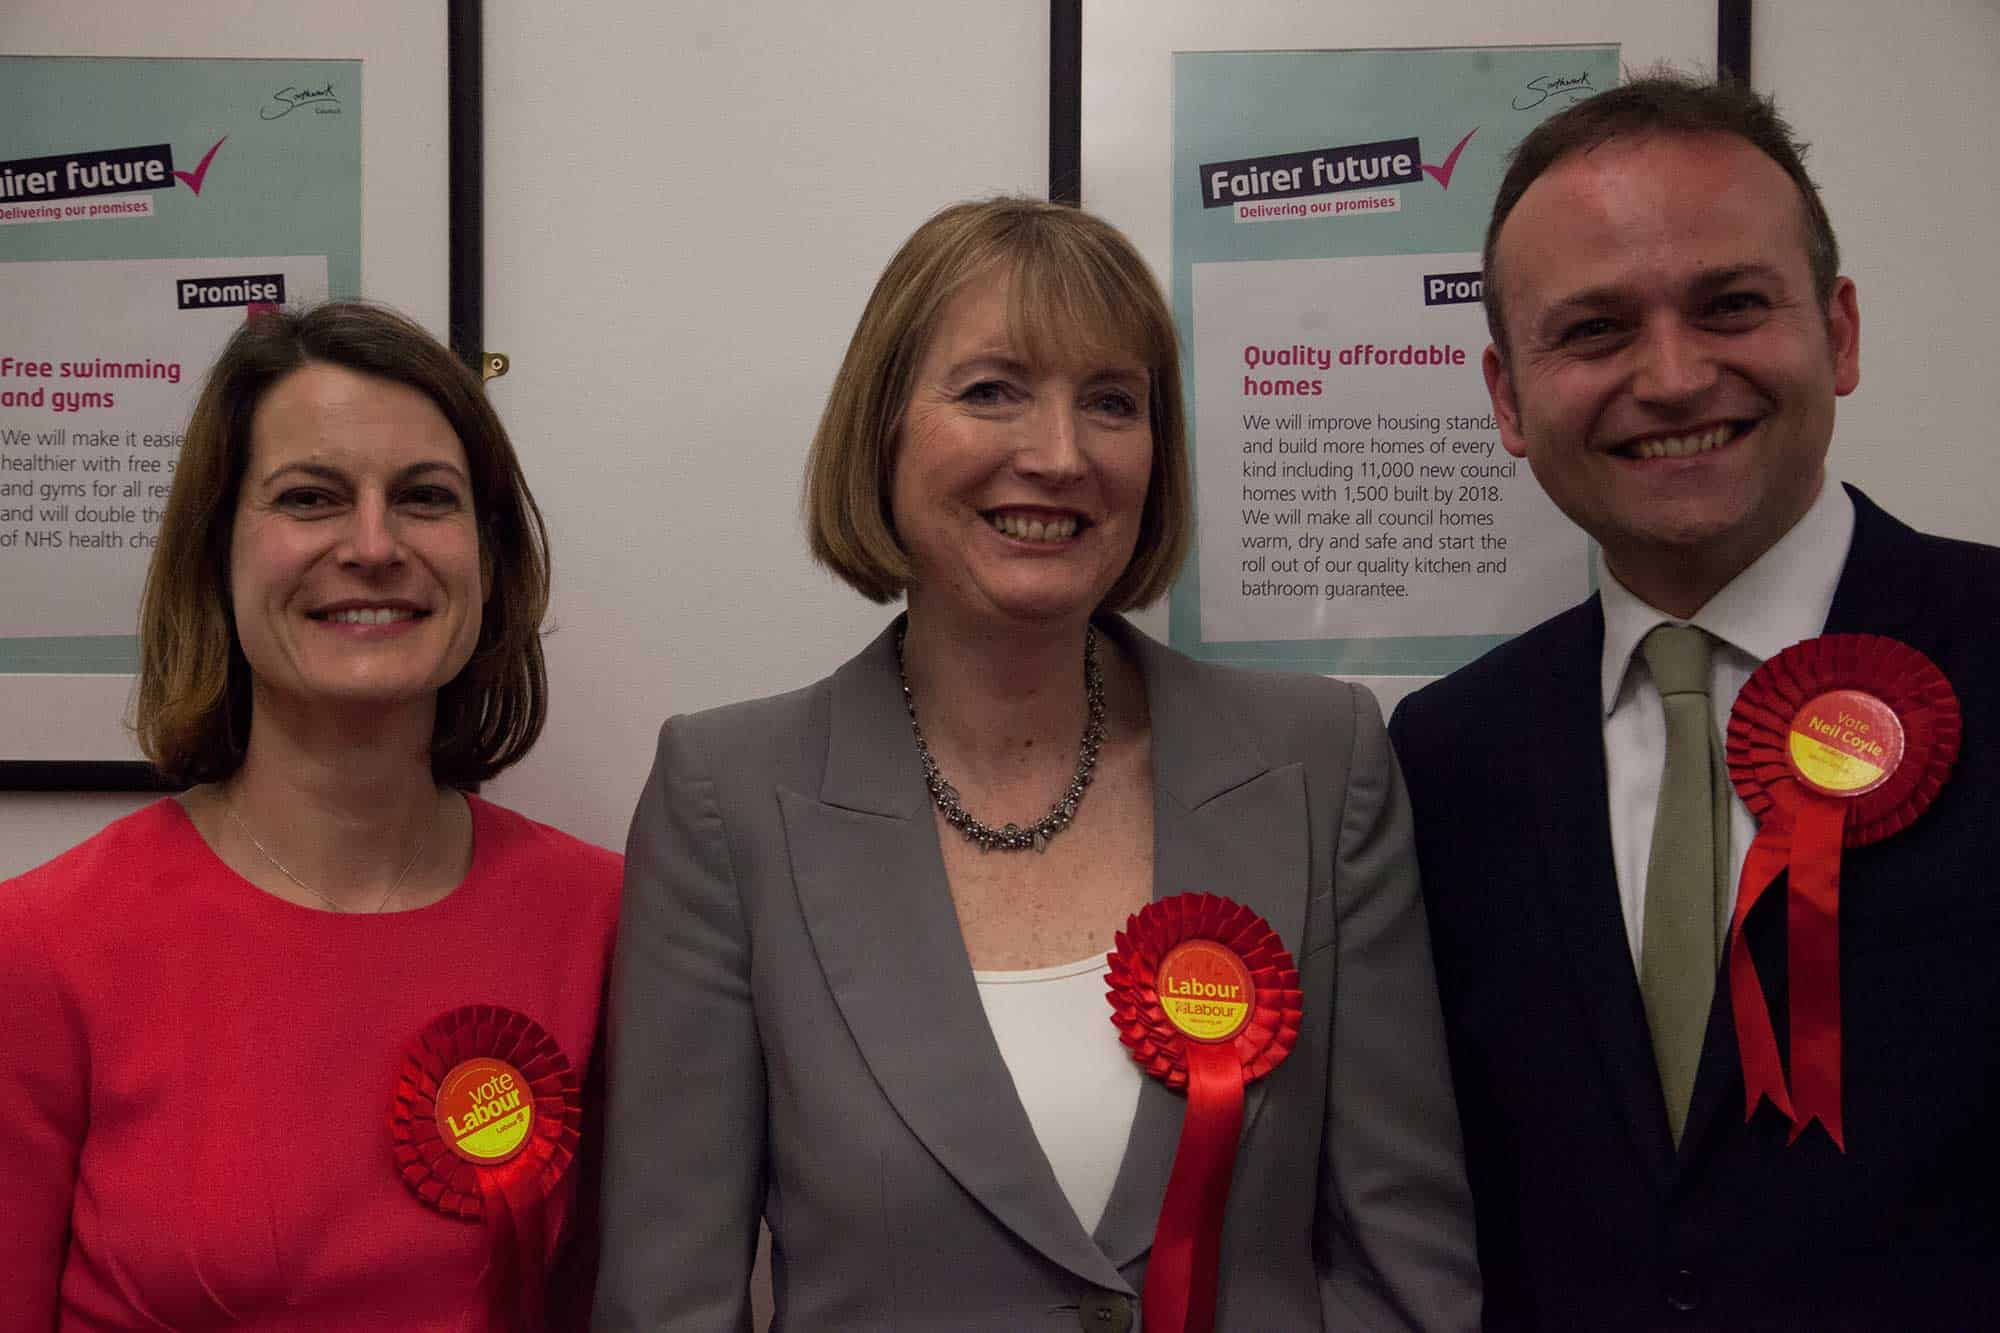 Harriet Harman (centre) was relected in Camberwell and Peckham and she was joined by newcomers, Neil Coyle (right) in Bermondsey and Old Southwark and Helen Hayes (left) in Dulwich and West Norwood. Photo: Alexandra Coyle